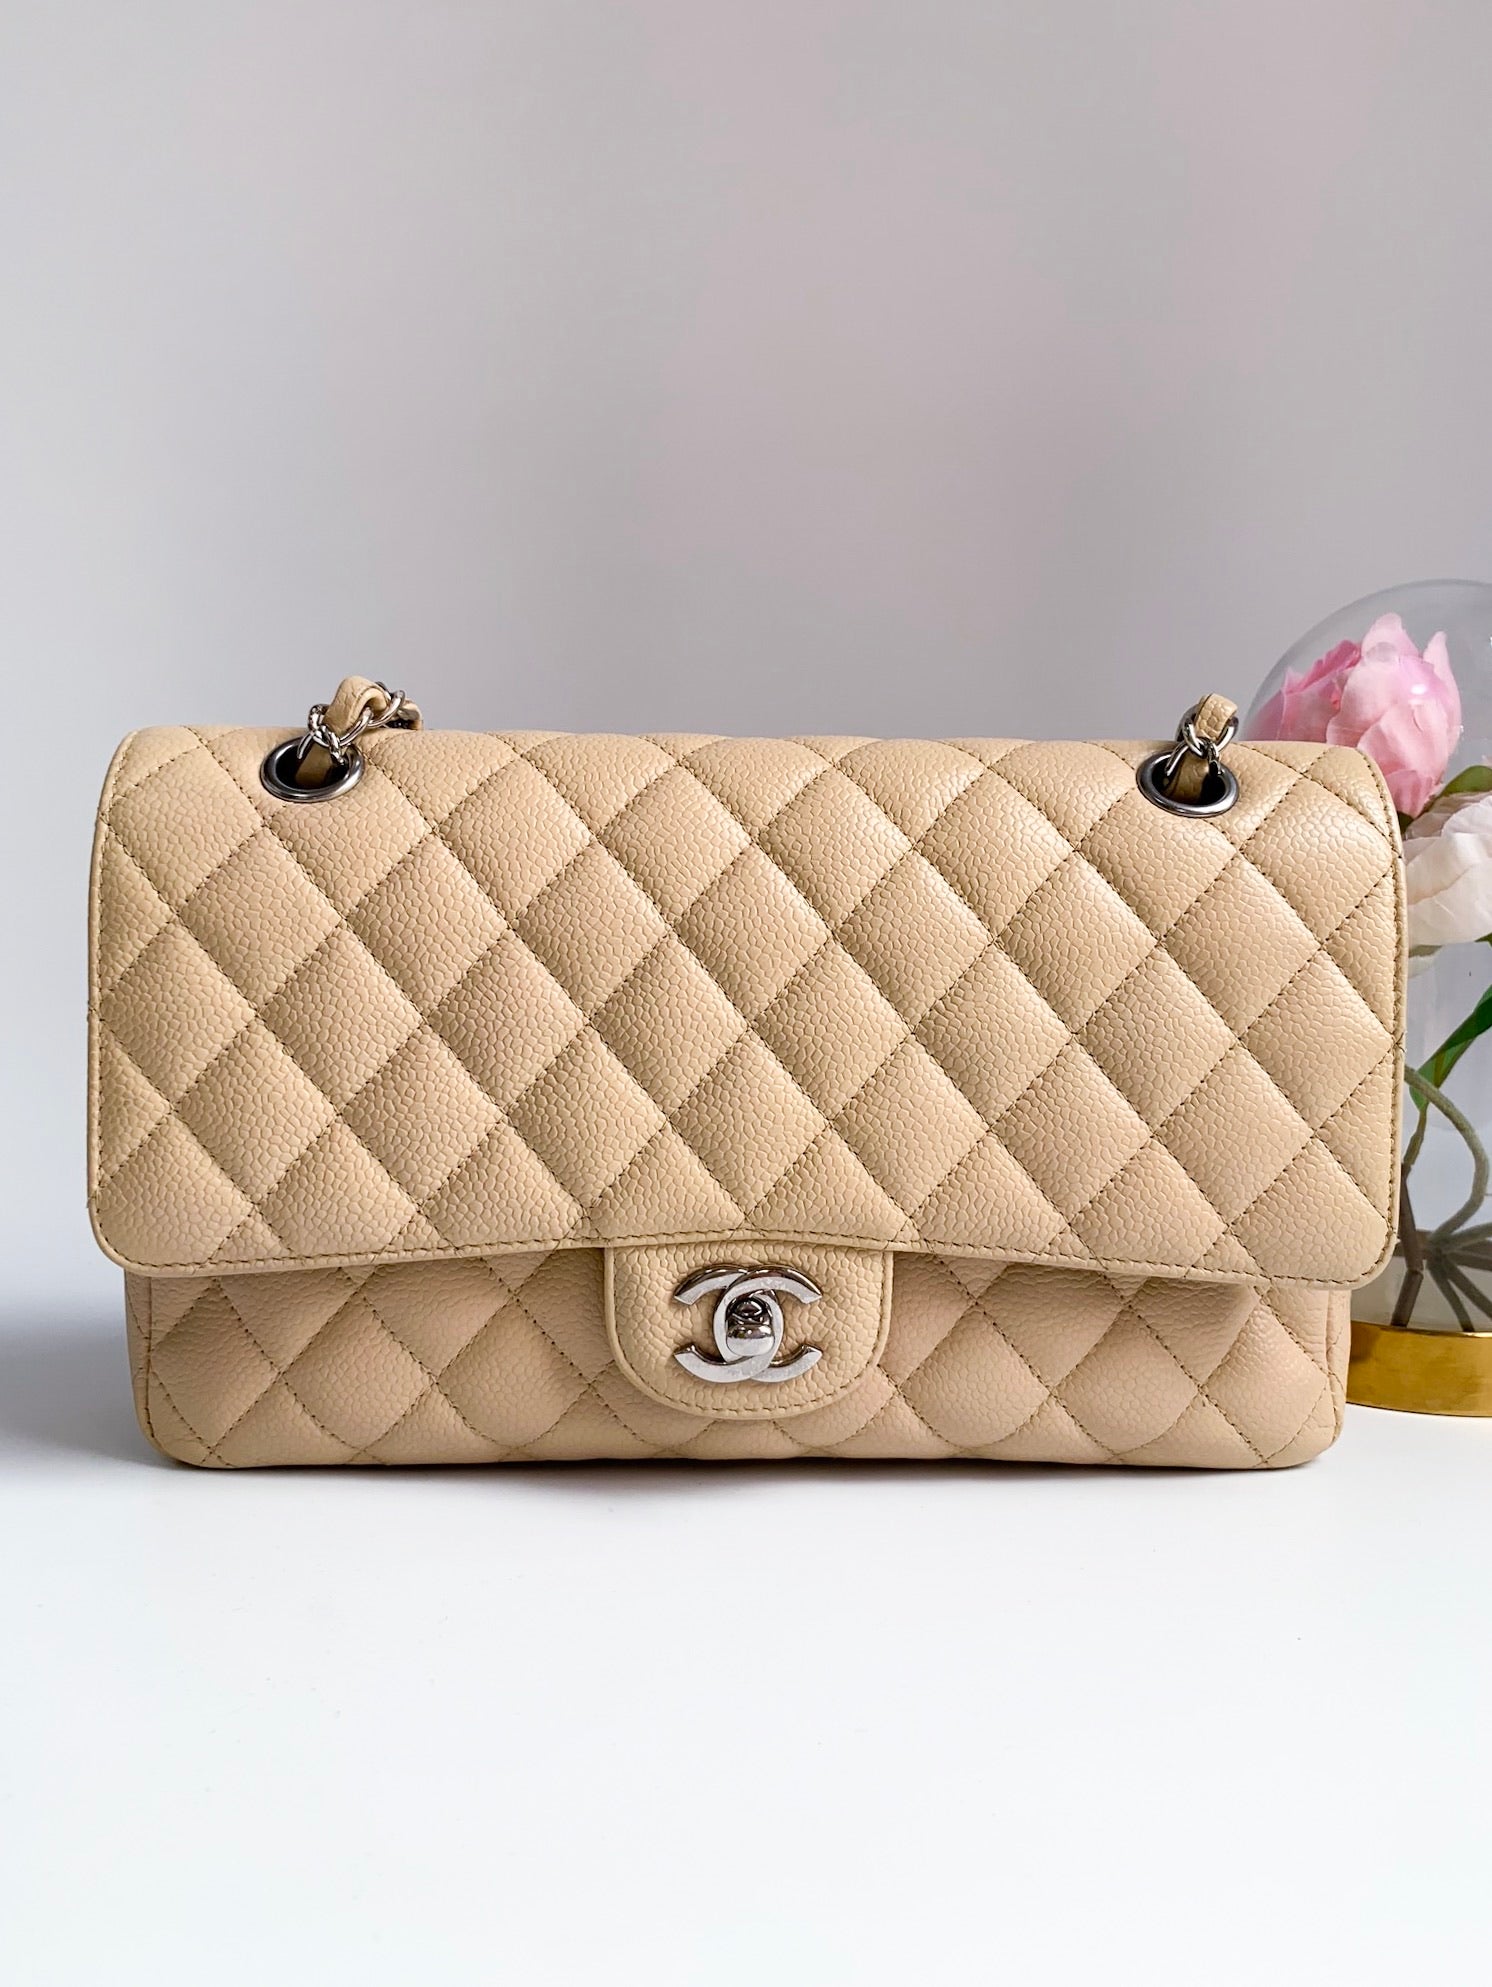 SOLD! Chanel Small Beige Clair Caviar Classic Flap